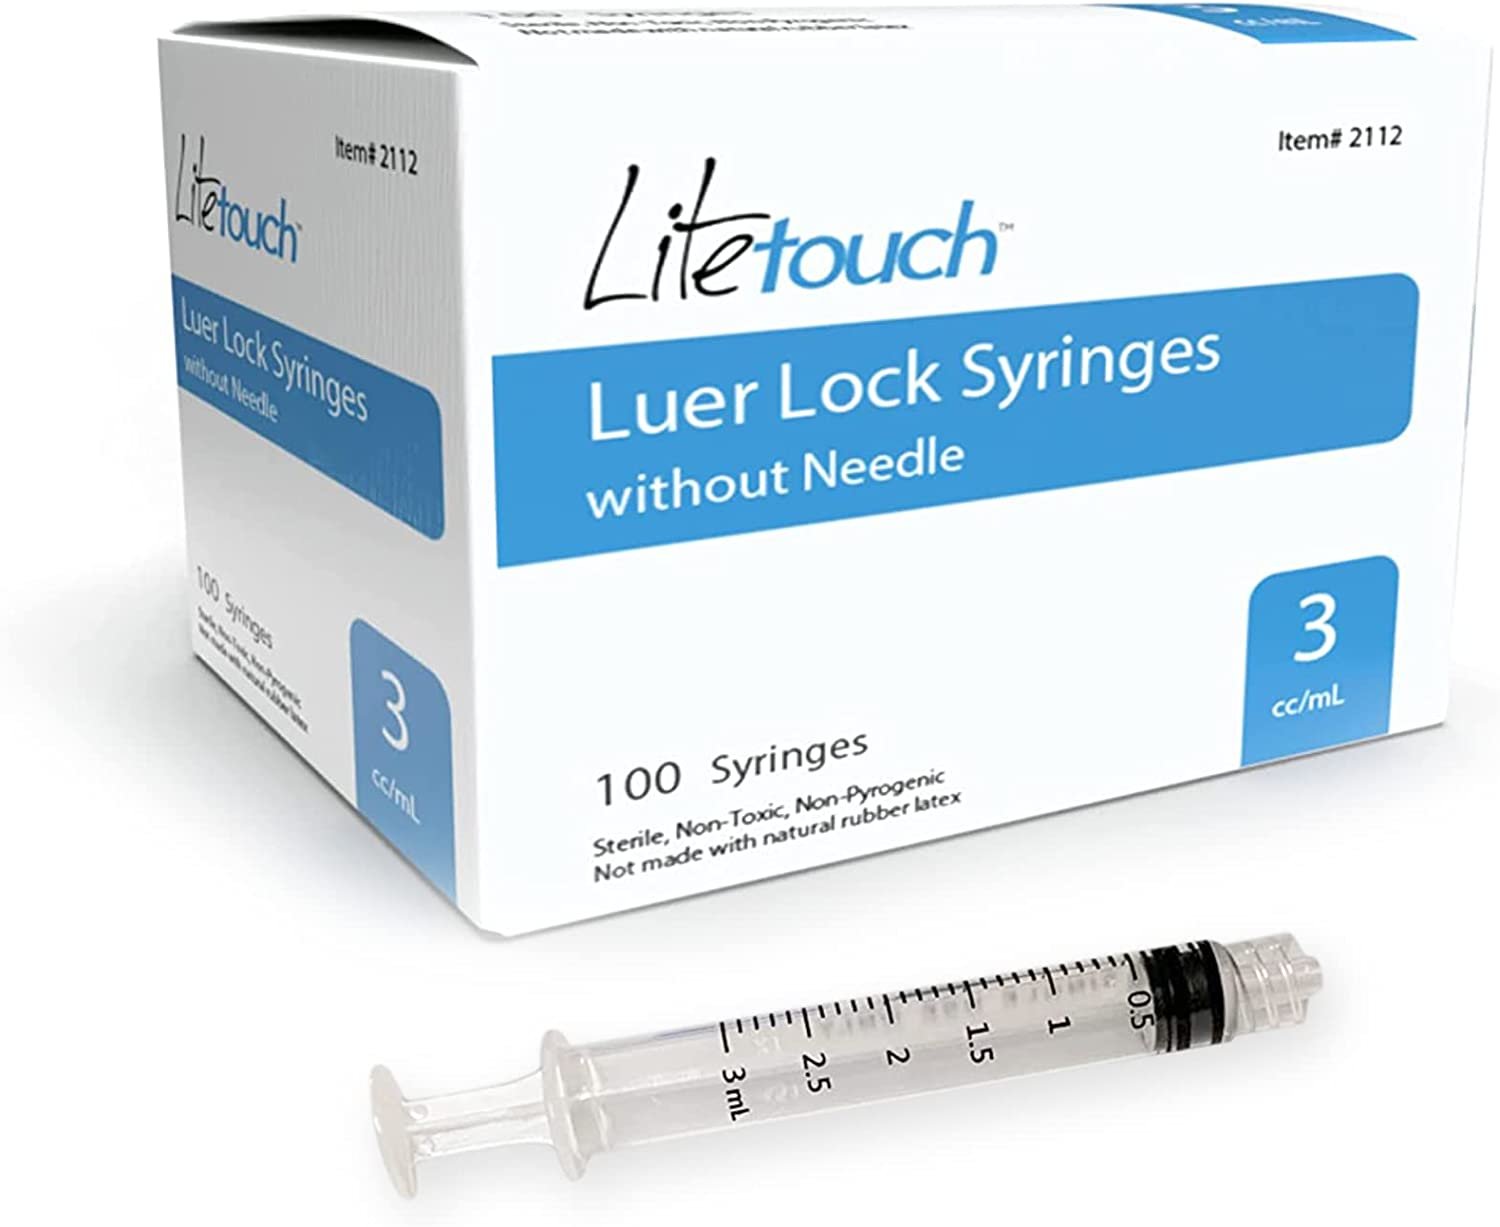 3cc/ml Syringes (any brand you can get fast will do)